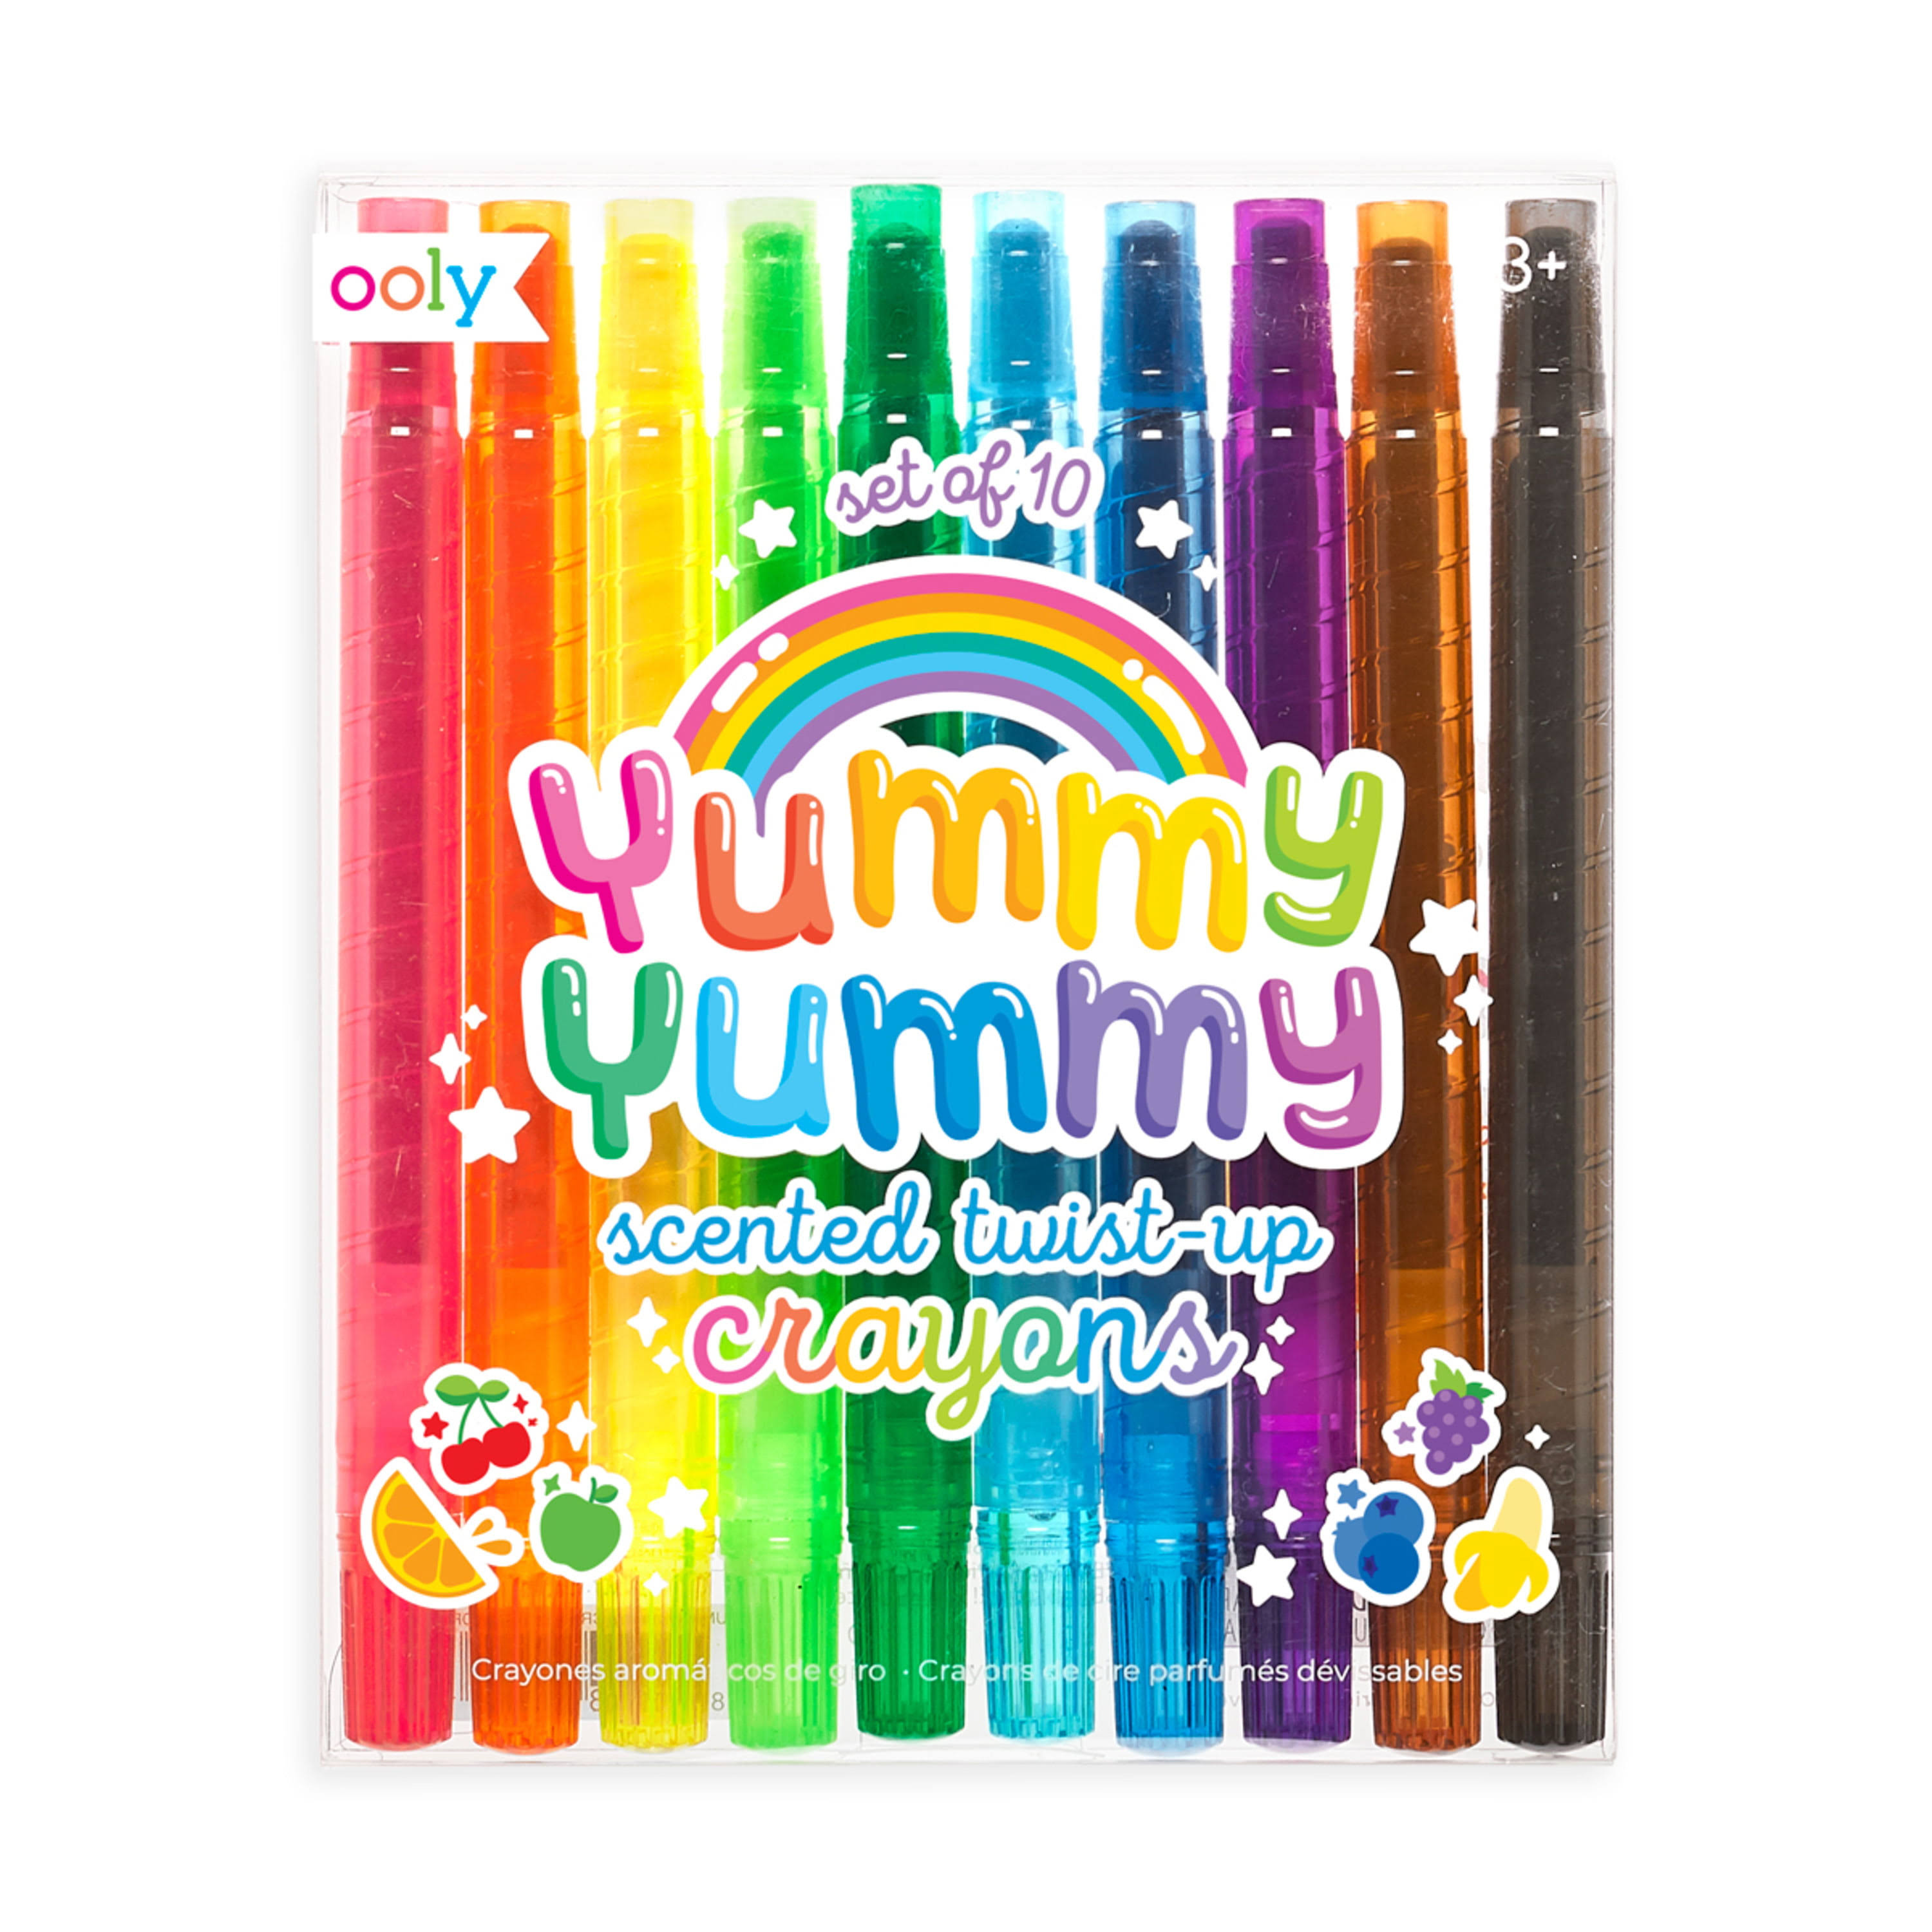 OOLY, Yummy Yummy, Scented Twist Up Crayons, Easy To Use - Set of 10